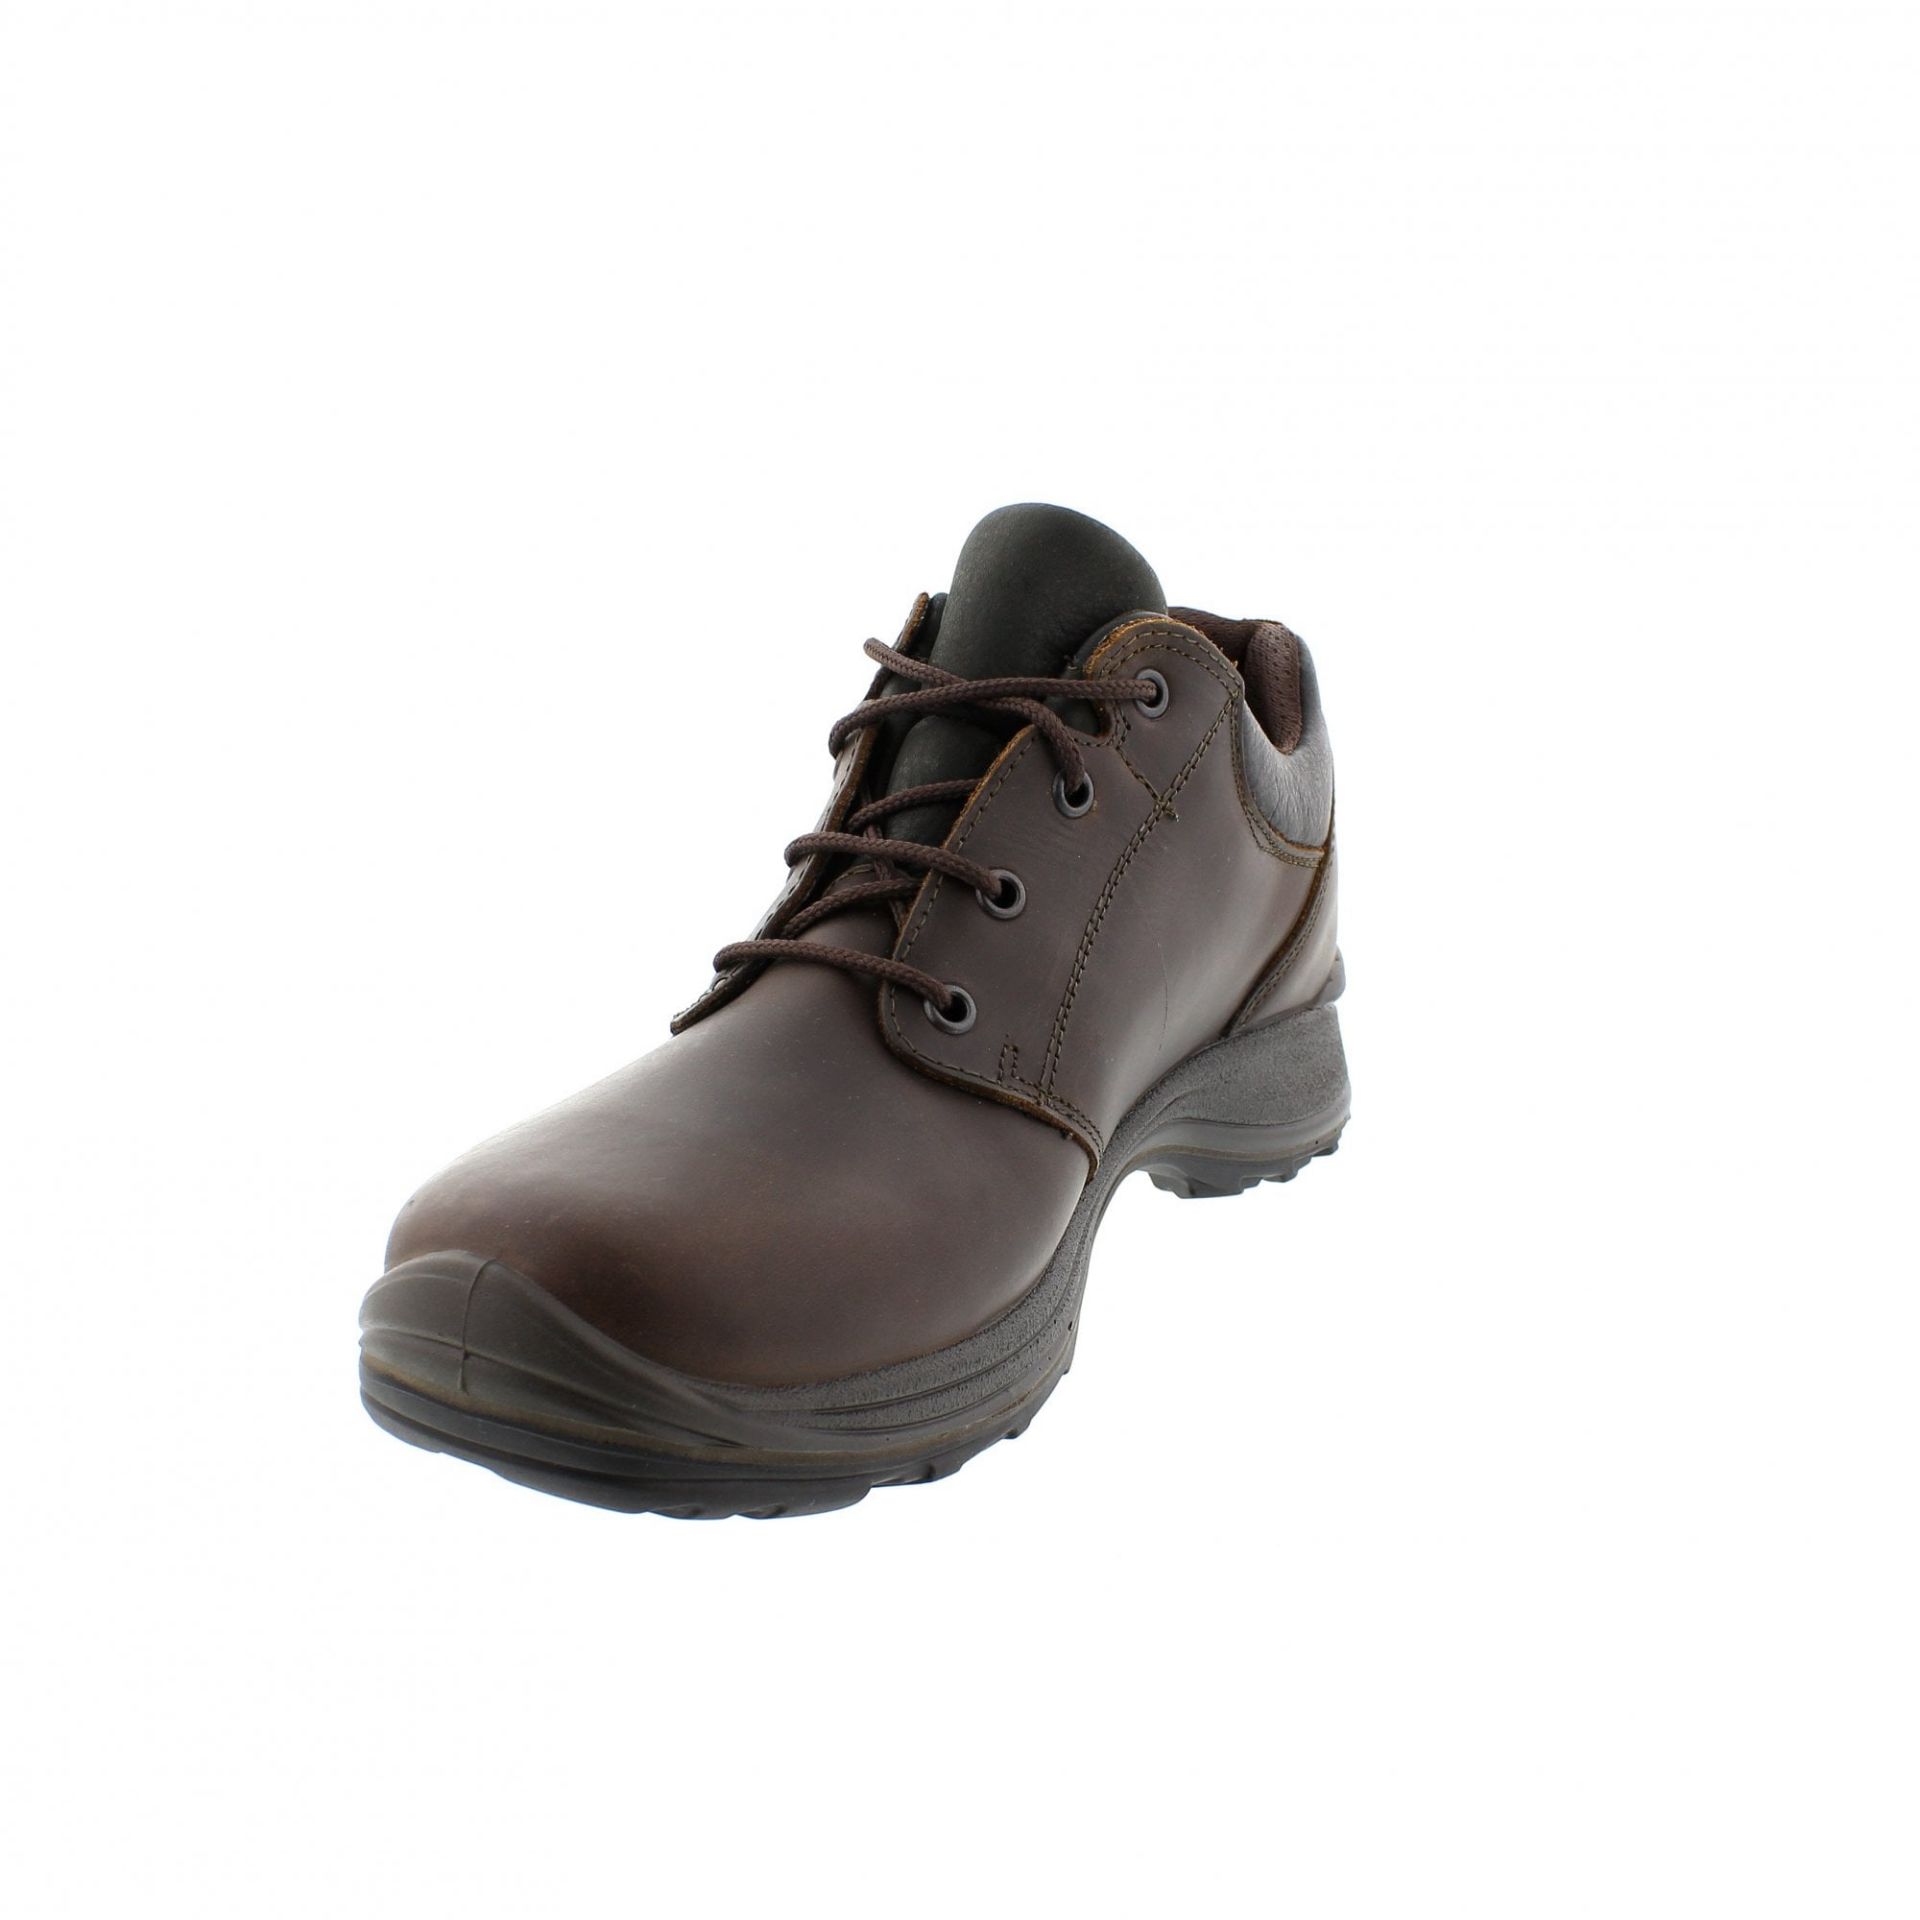 1 x Pair of Men's Grisport Brown Leather GriTex Shoes - Rogerson Footwear - Brand New and Boxed - - Image 3 of 9